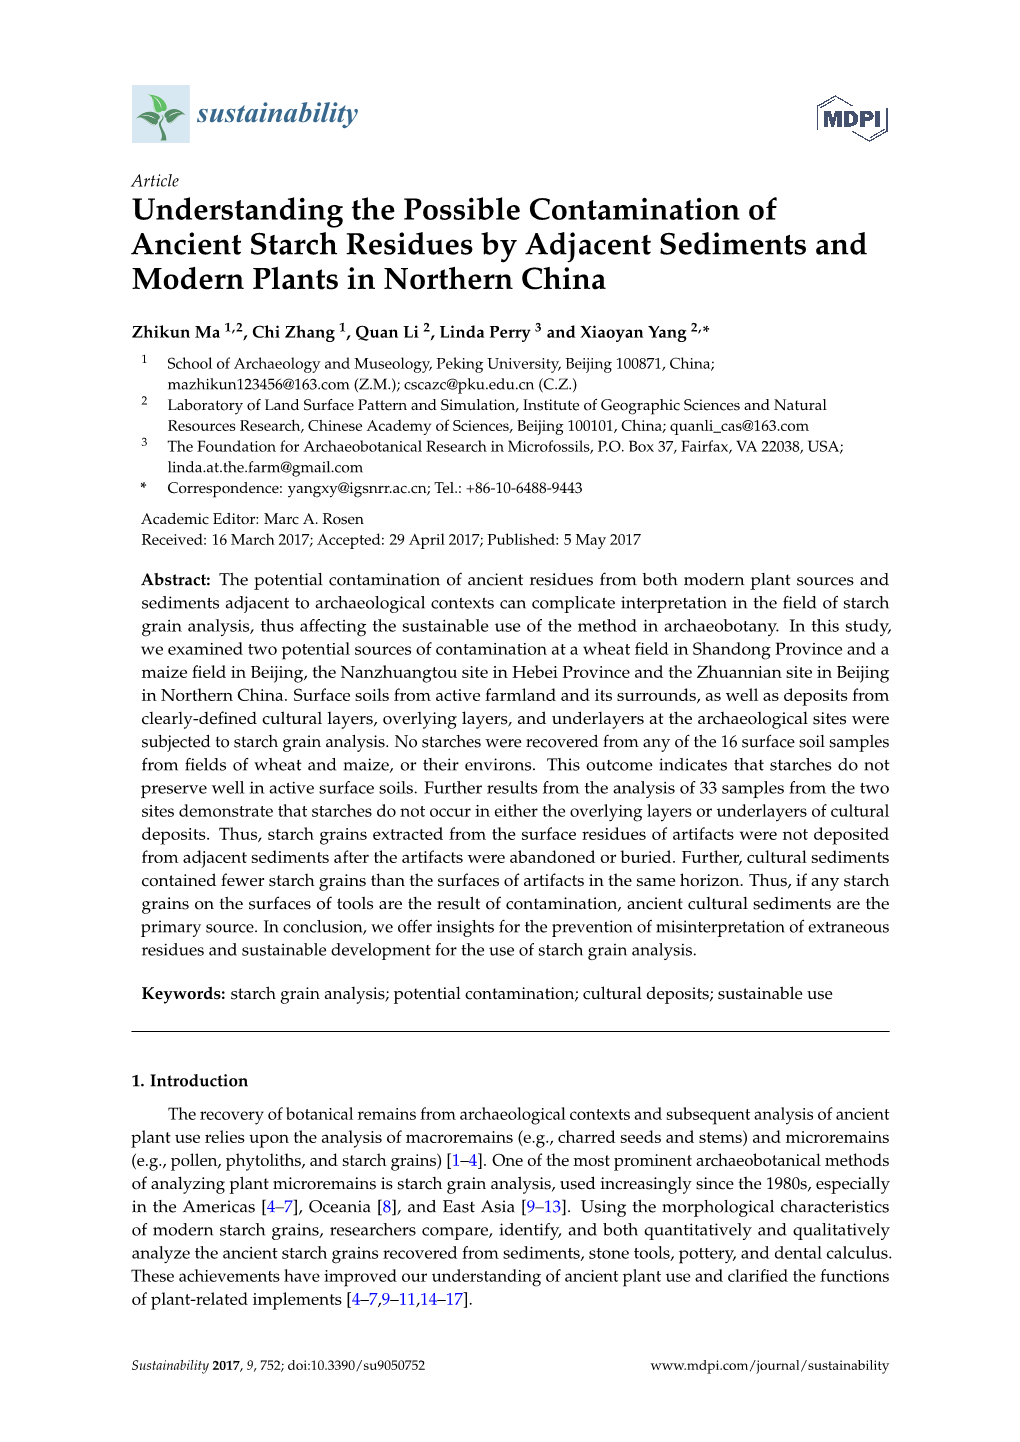 Understanding the Possible Contamination of Ancient Starch Residues by Adjacent Sediments and Modern Plants in Northern China